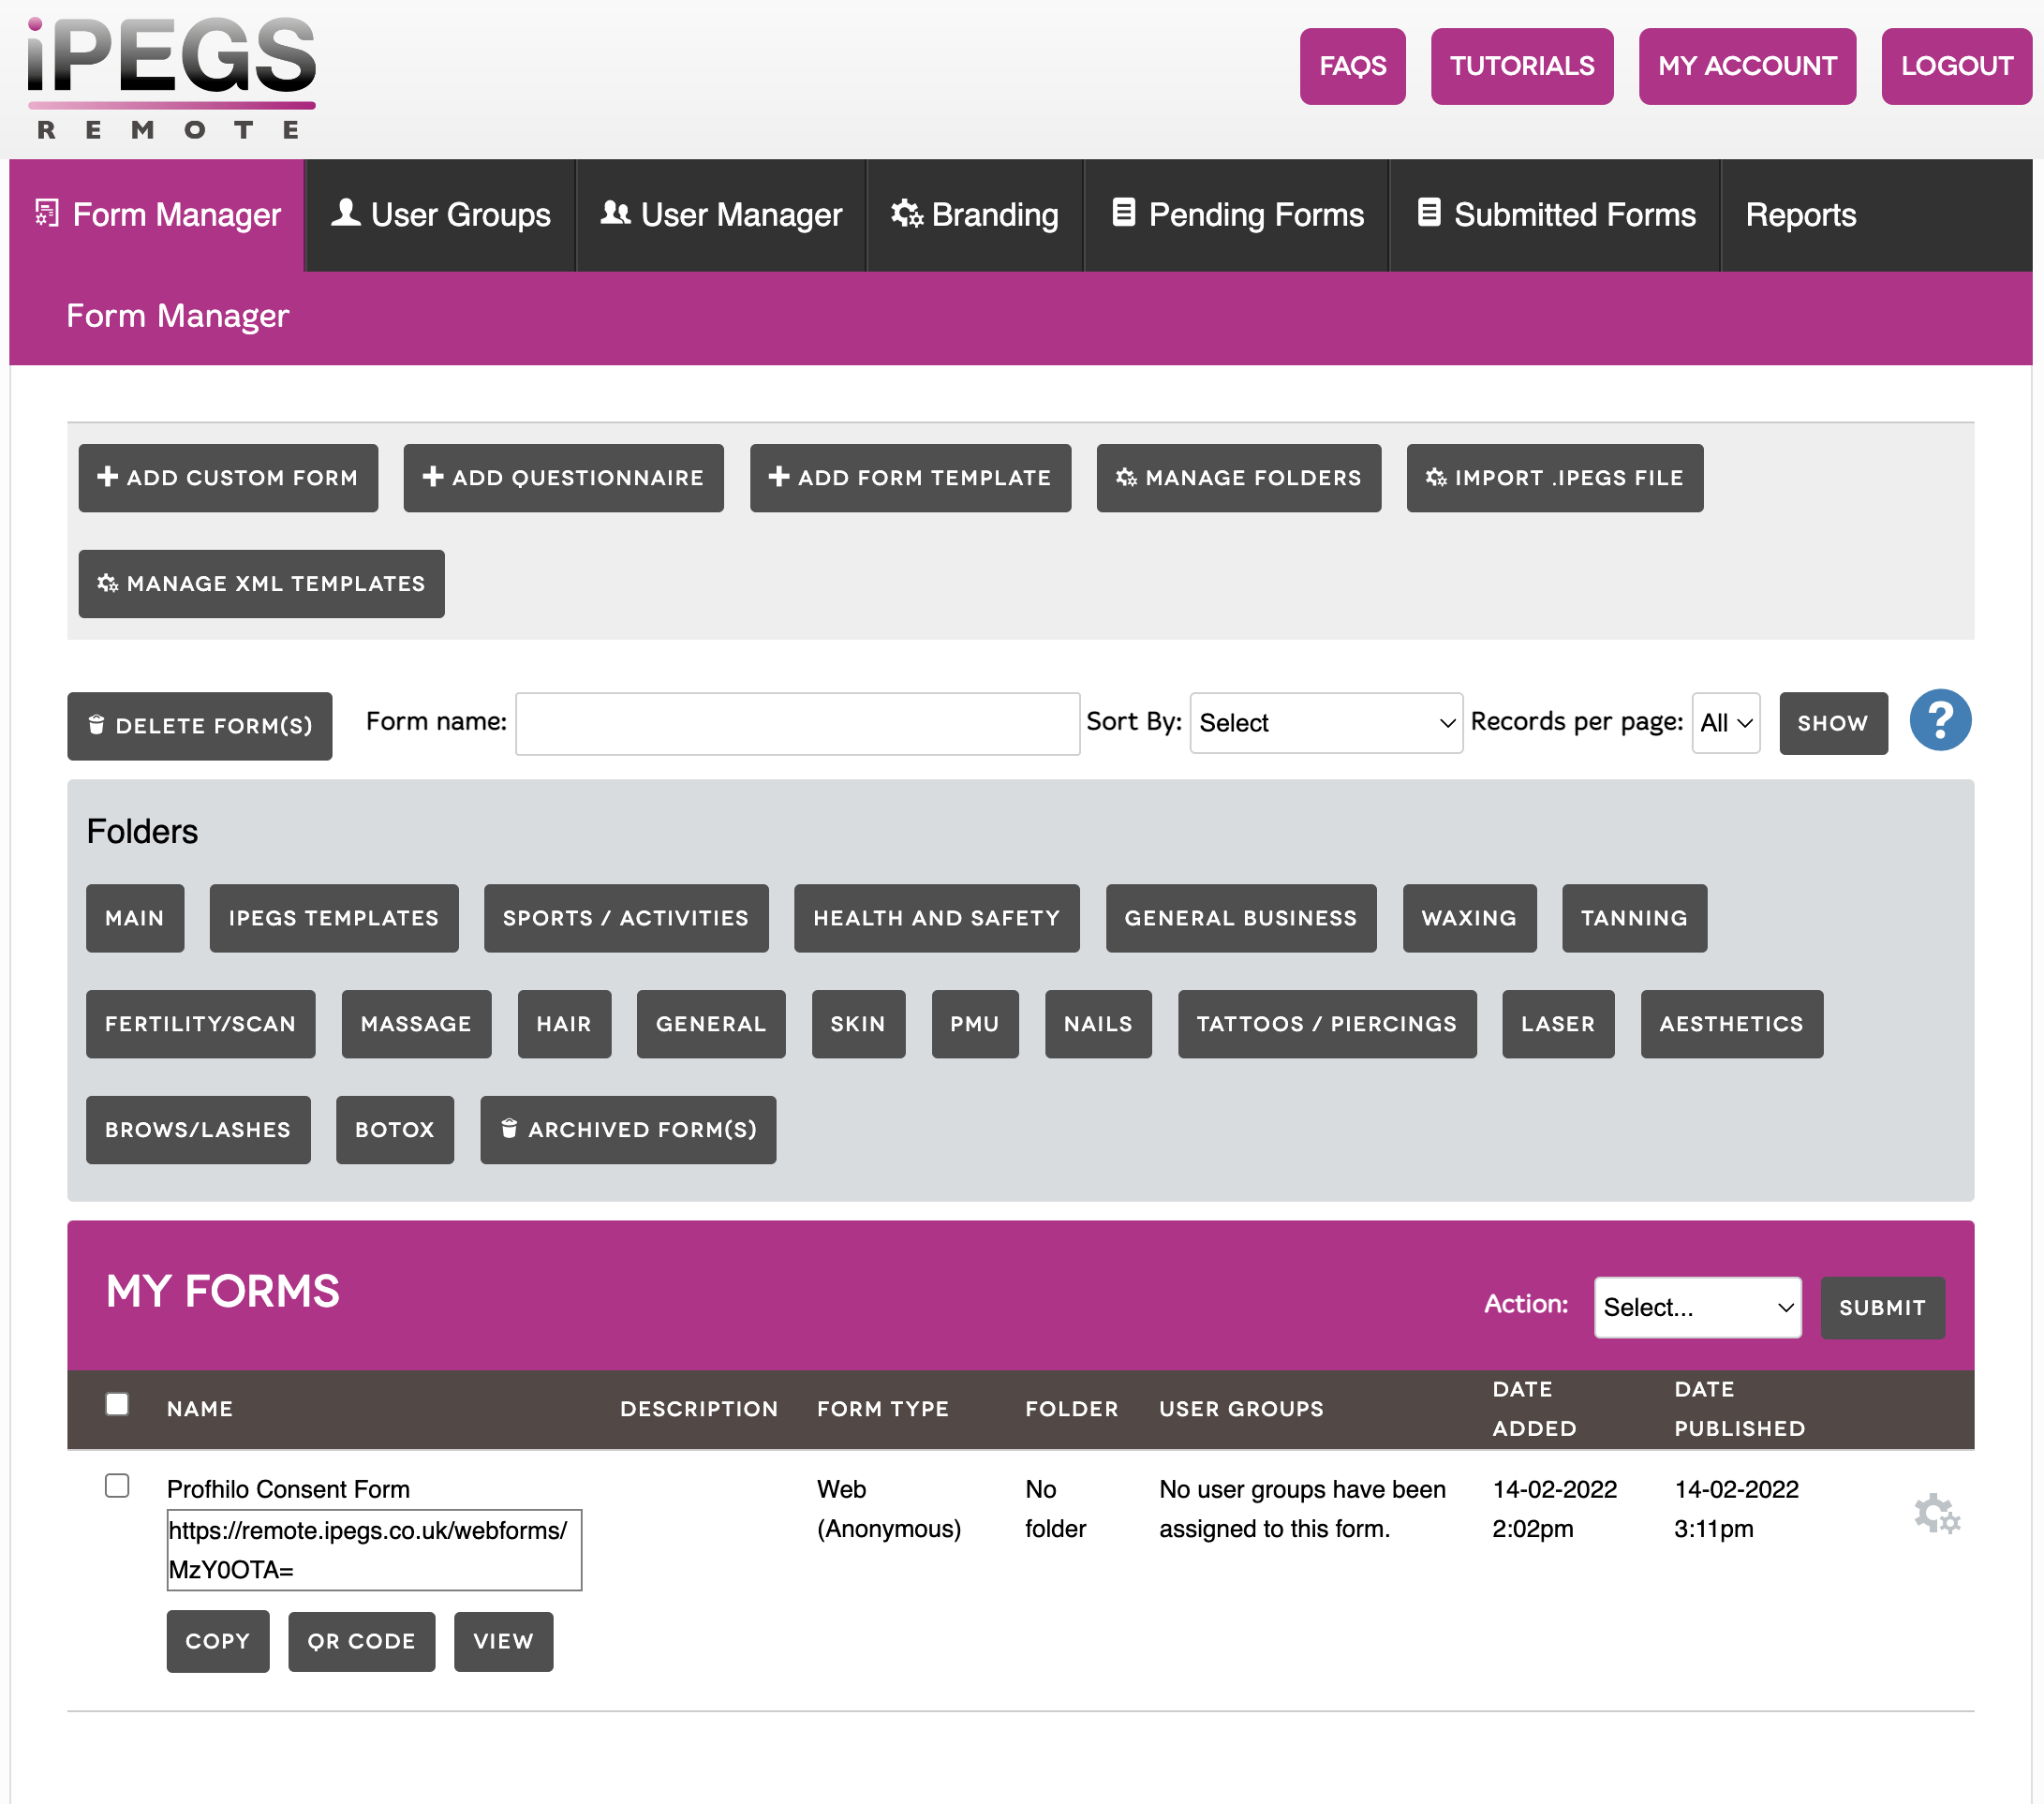 Easily view and manage your form templates and submitted forms on the iPEGS Remote Online Portal.